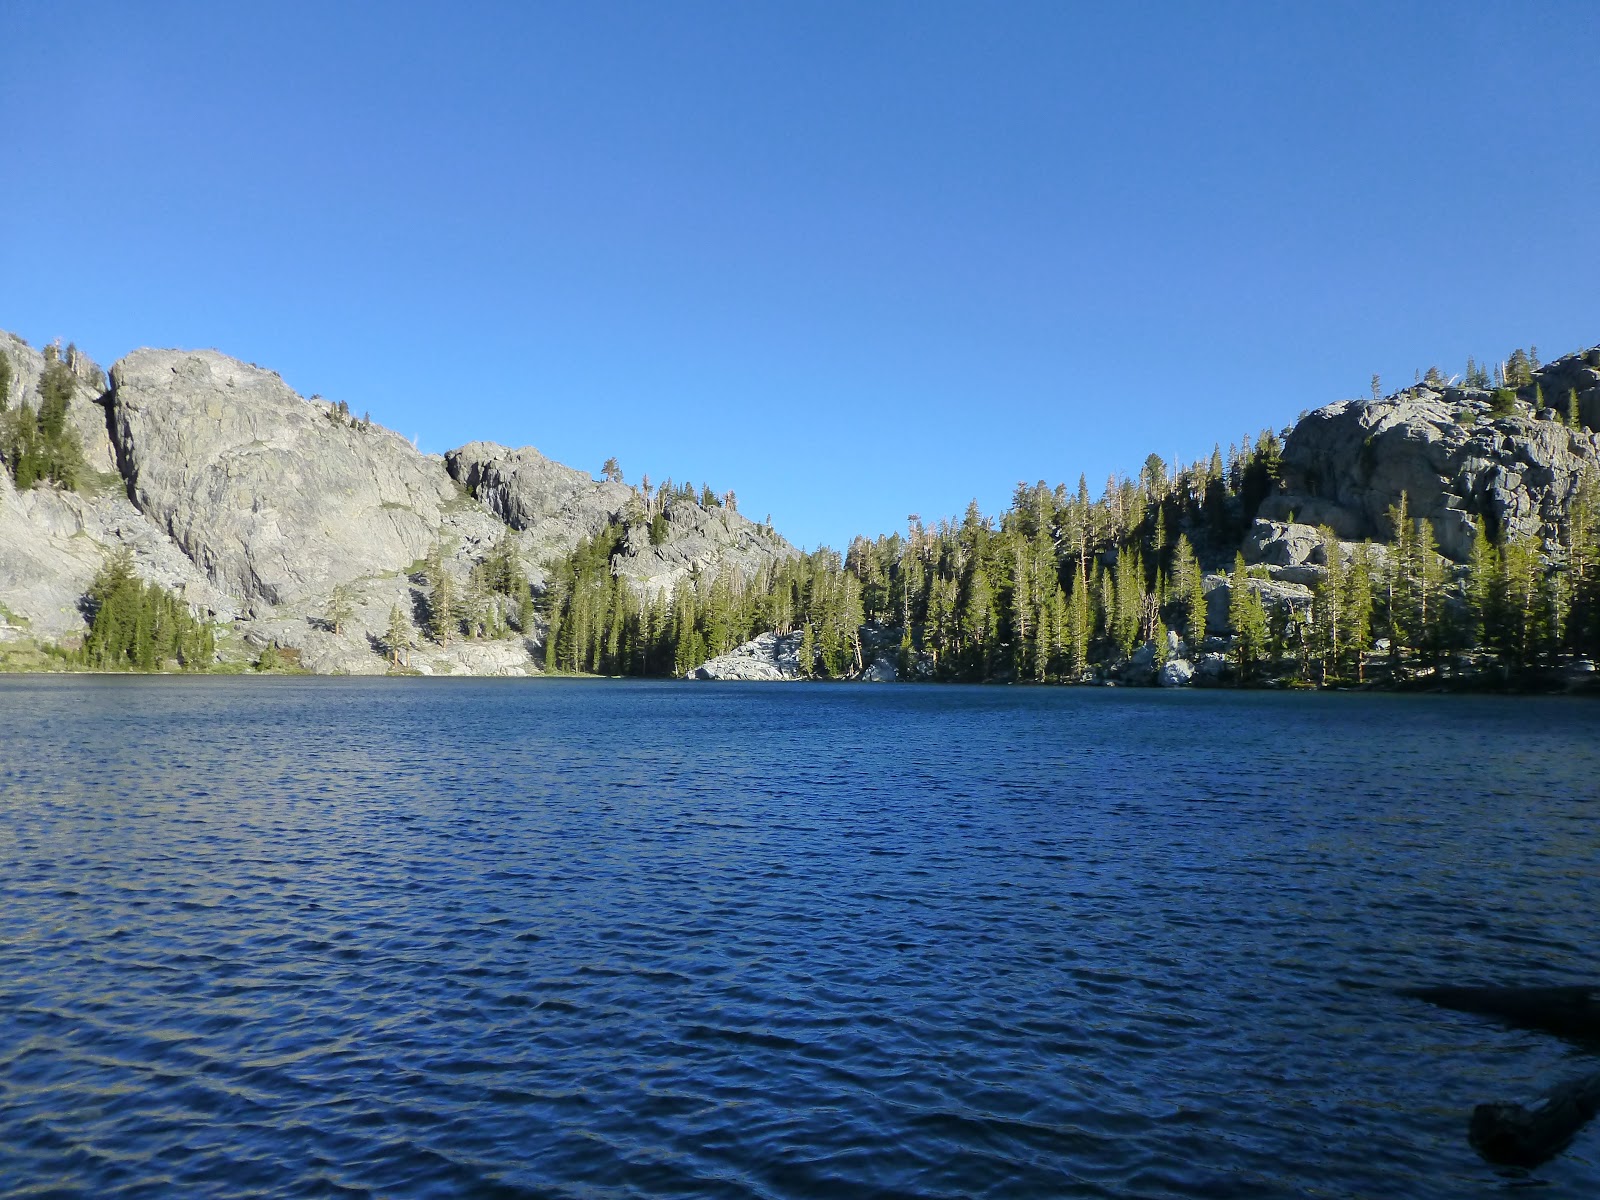 Rosalie Lake, right by our camp site